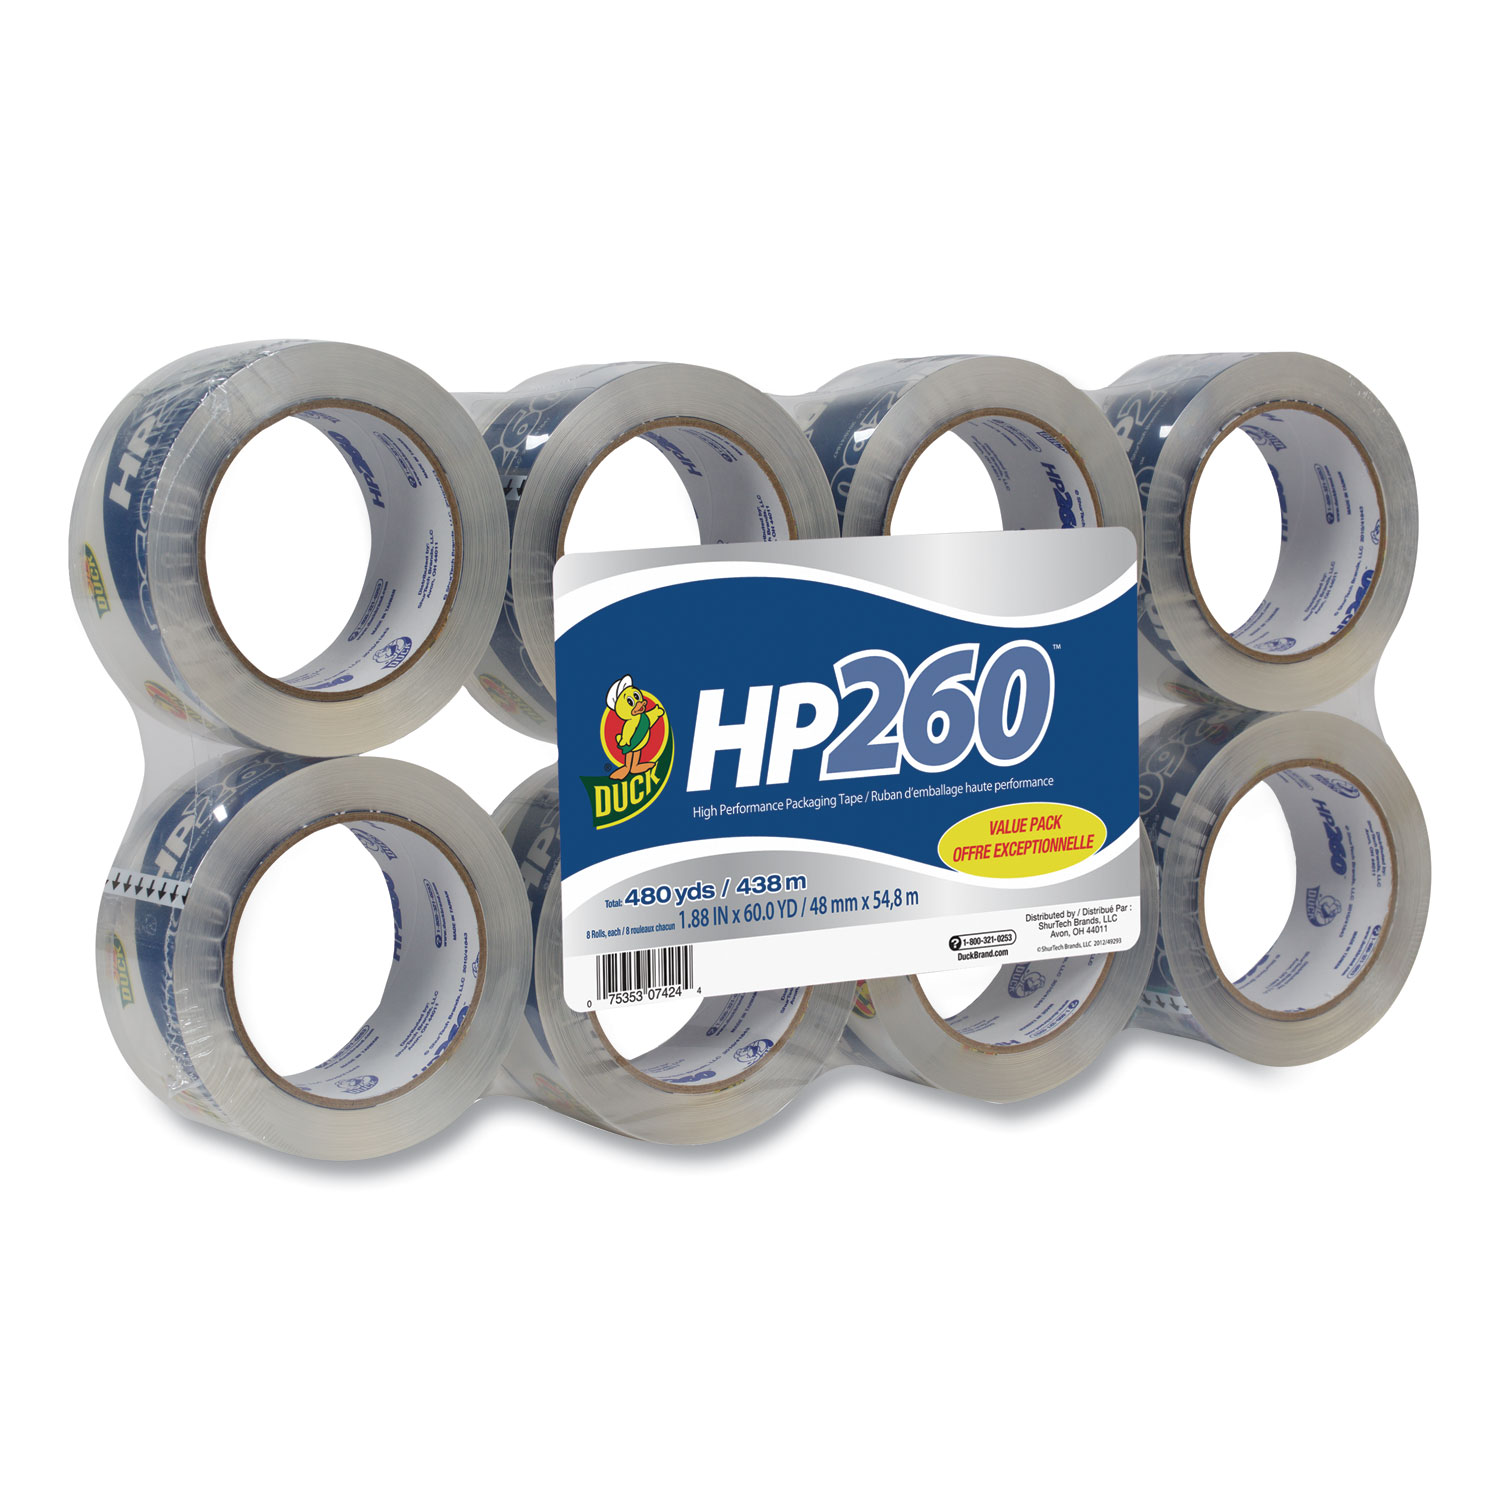  Duck 00-07424 HP260 Packaging Tape, 3 Core, 1.88 x 60 yds, Clear, 8/Pack (DUC0007424) 